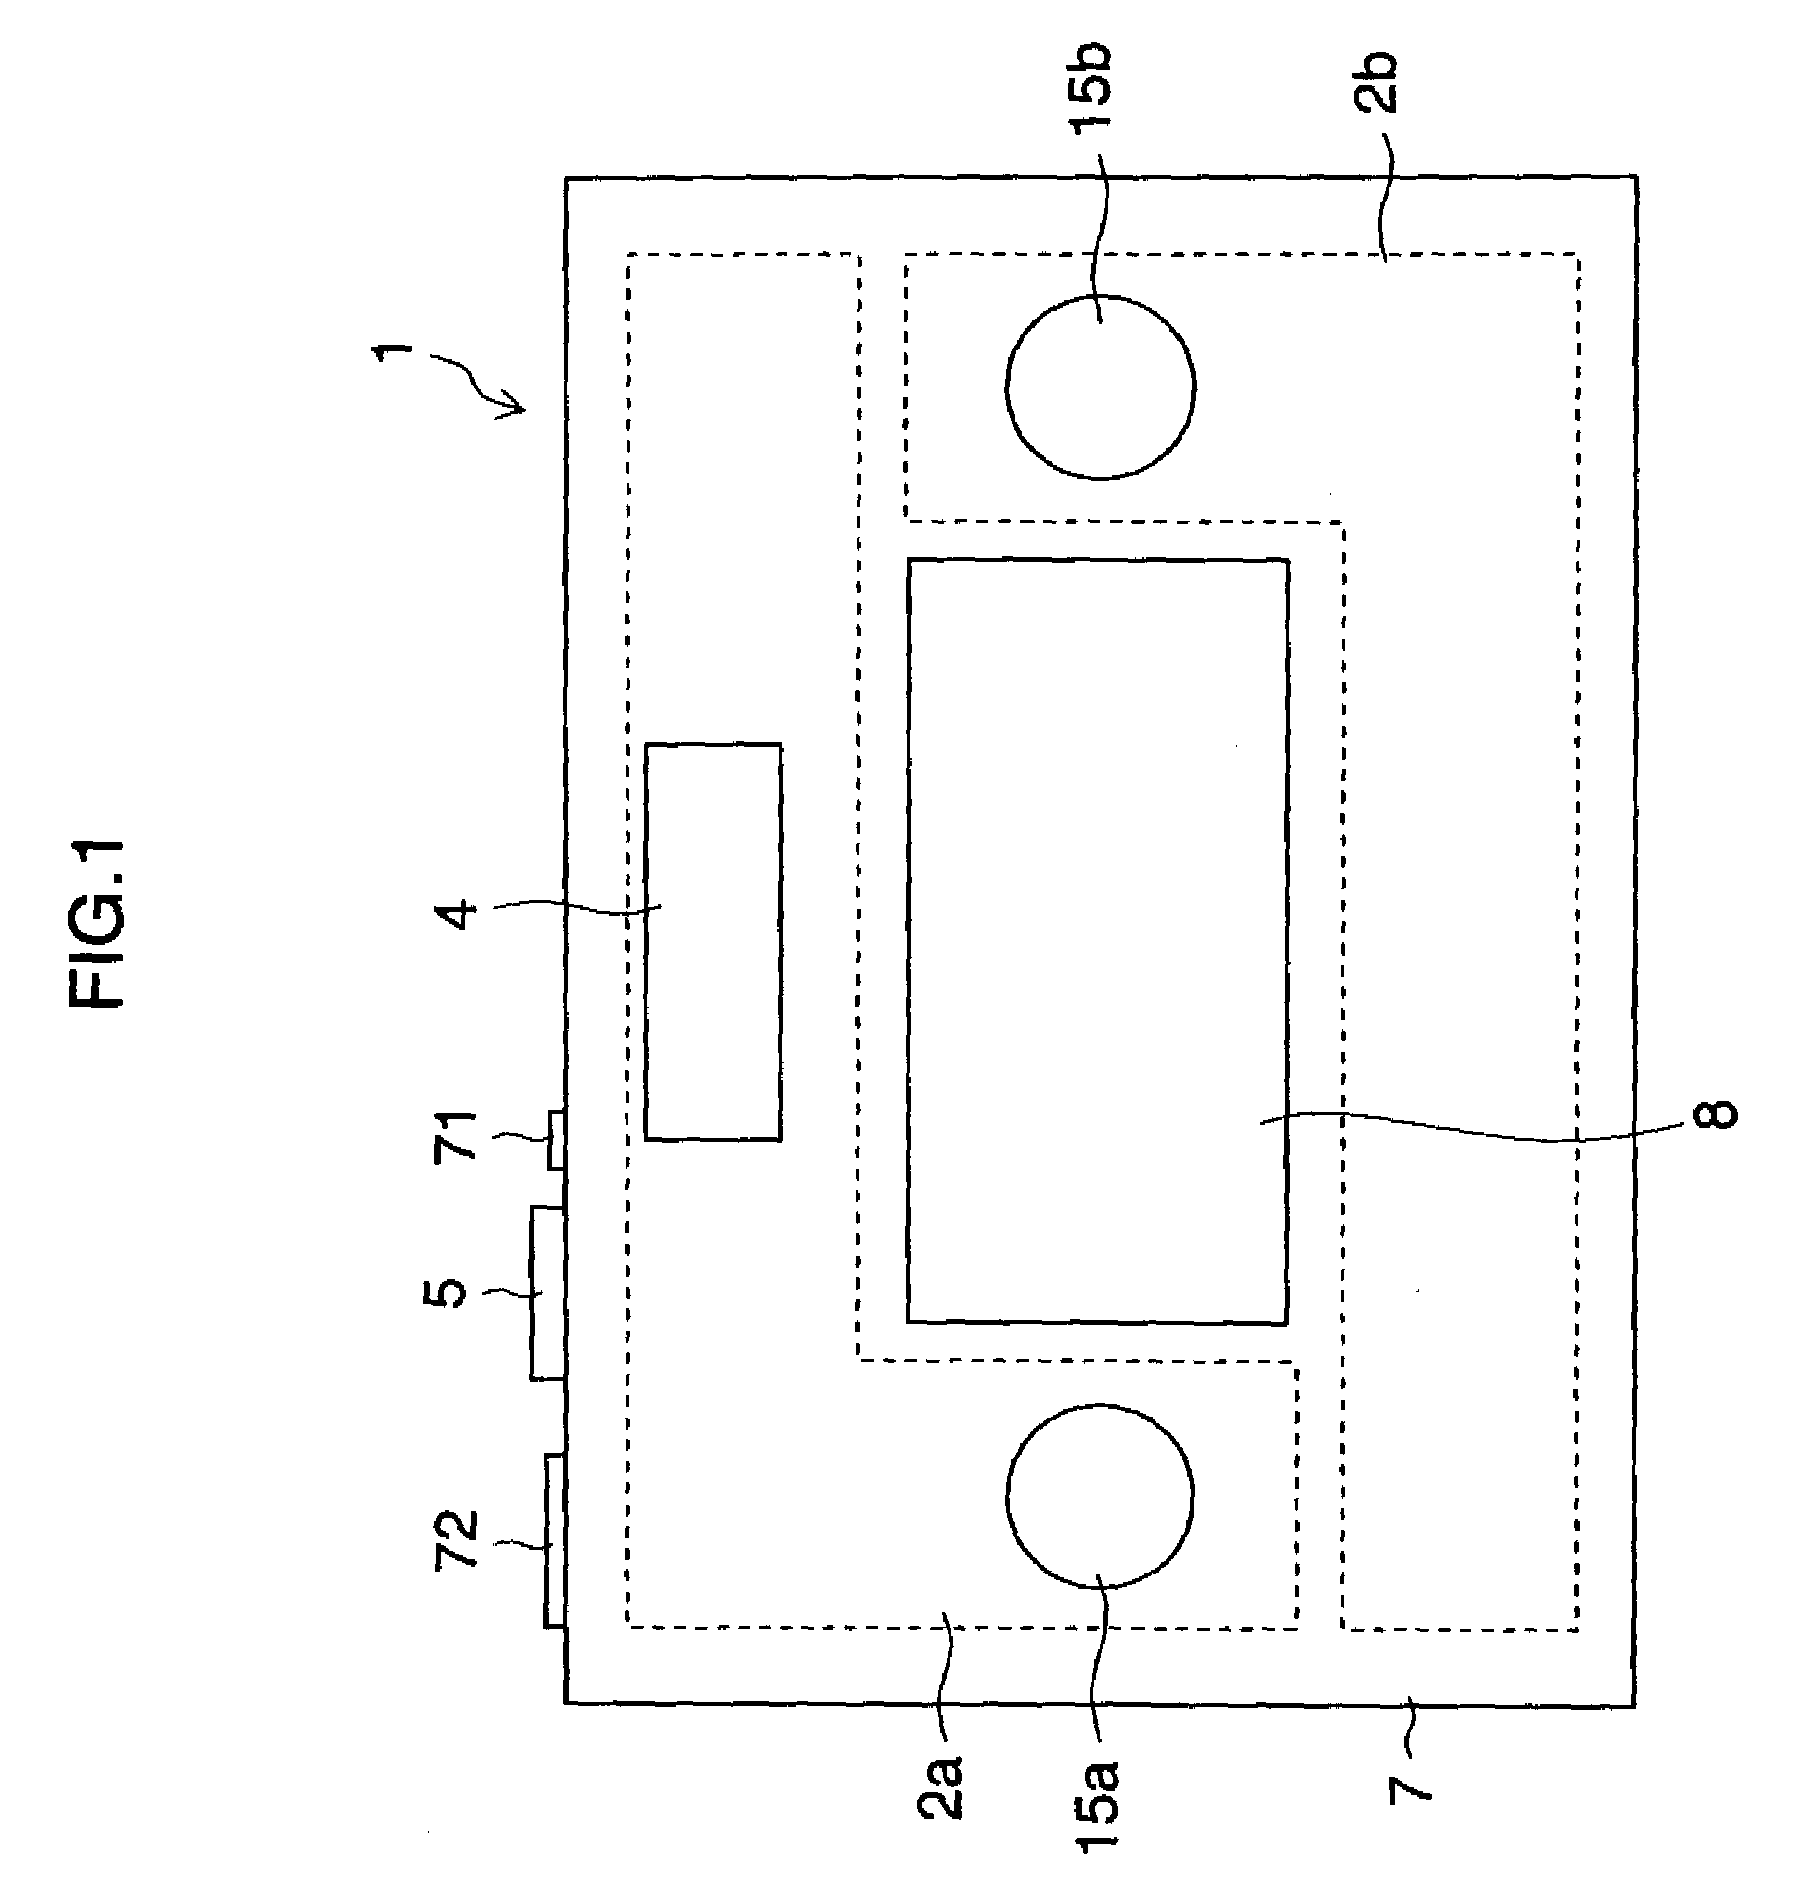 Stereoscopic imaging device